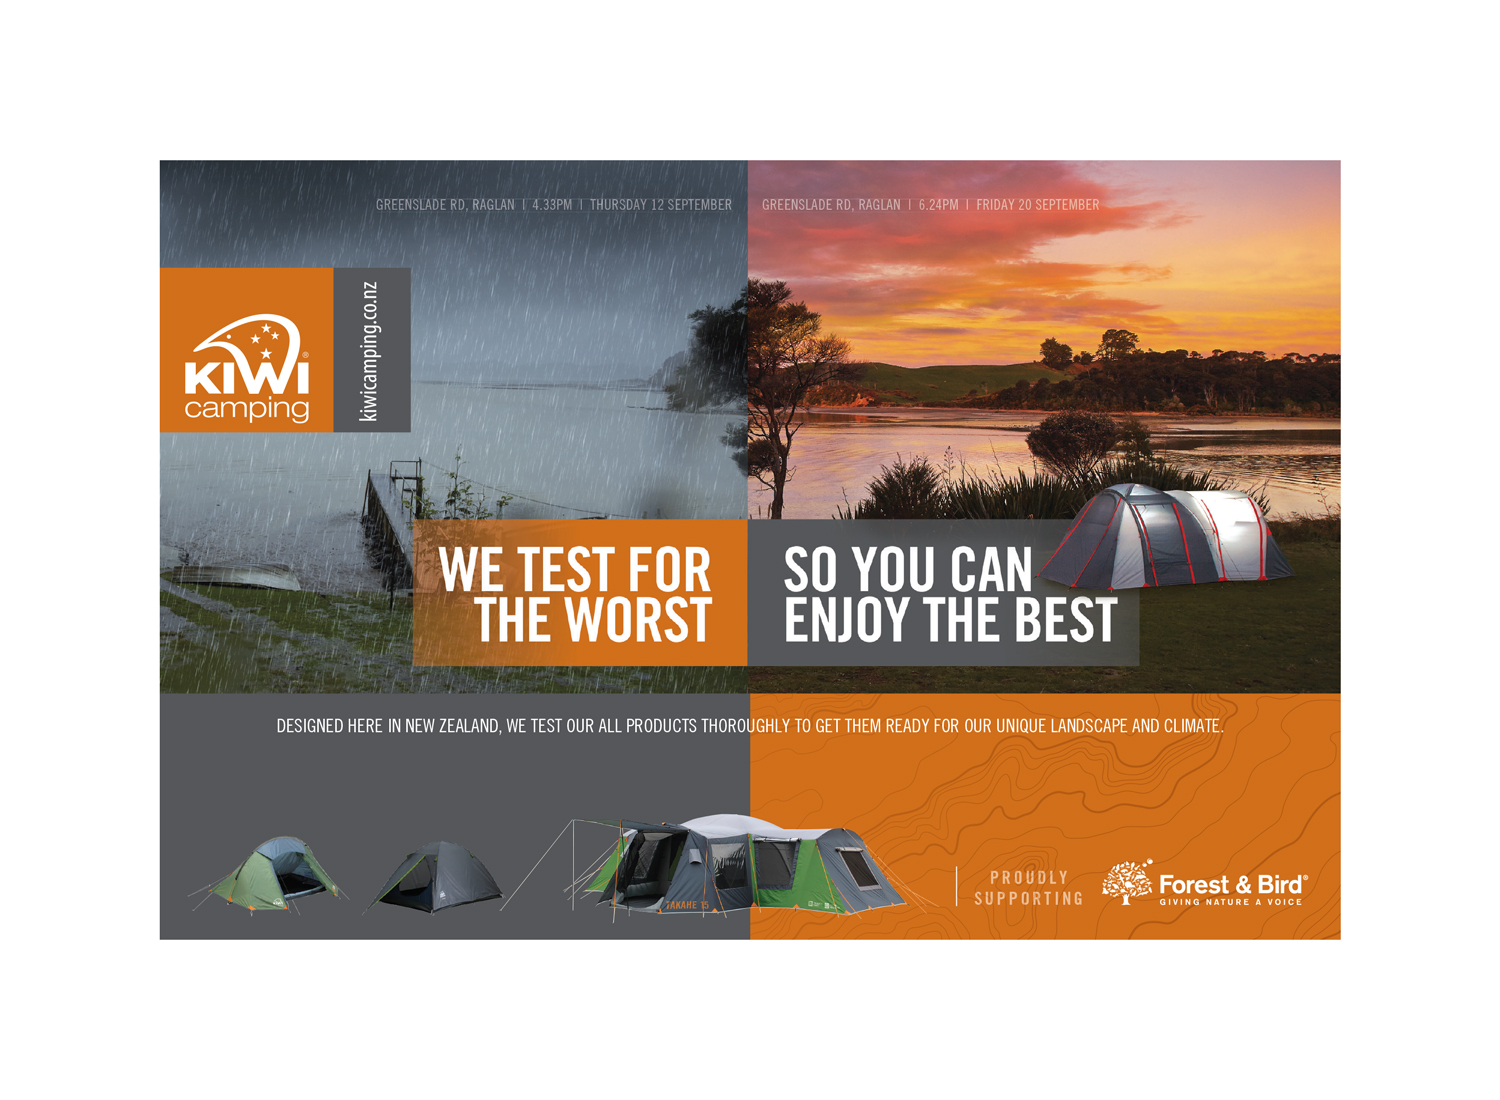  Campaign for Kiwi Camping focusing on quality control to inspire confidence in the product 